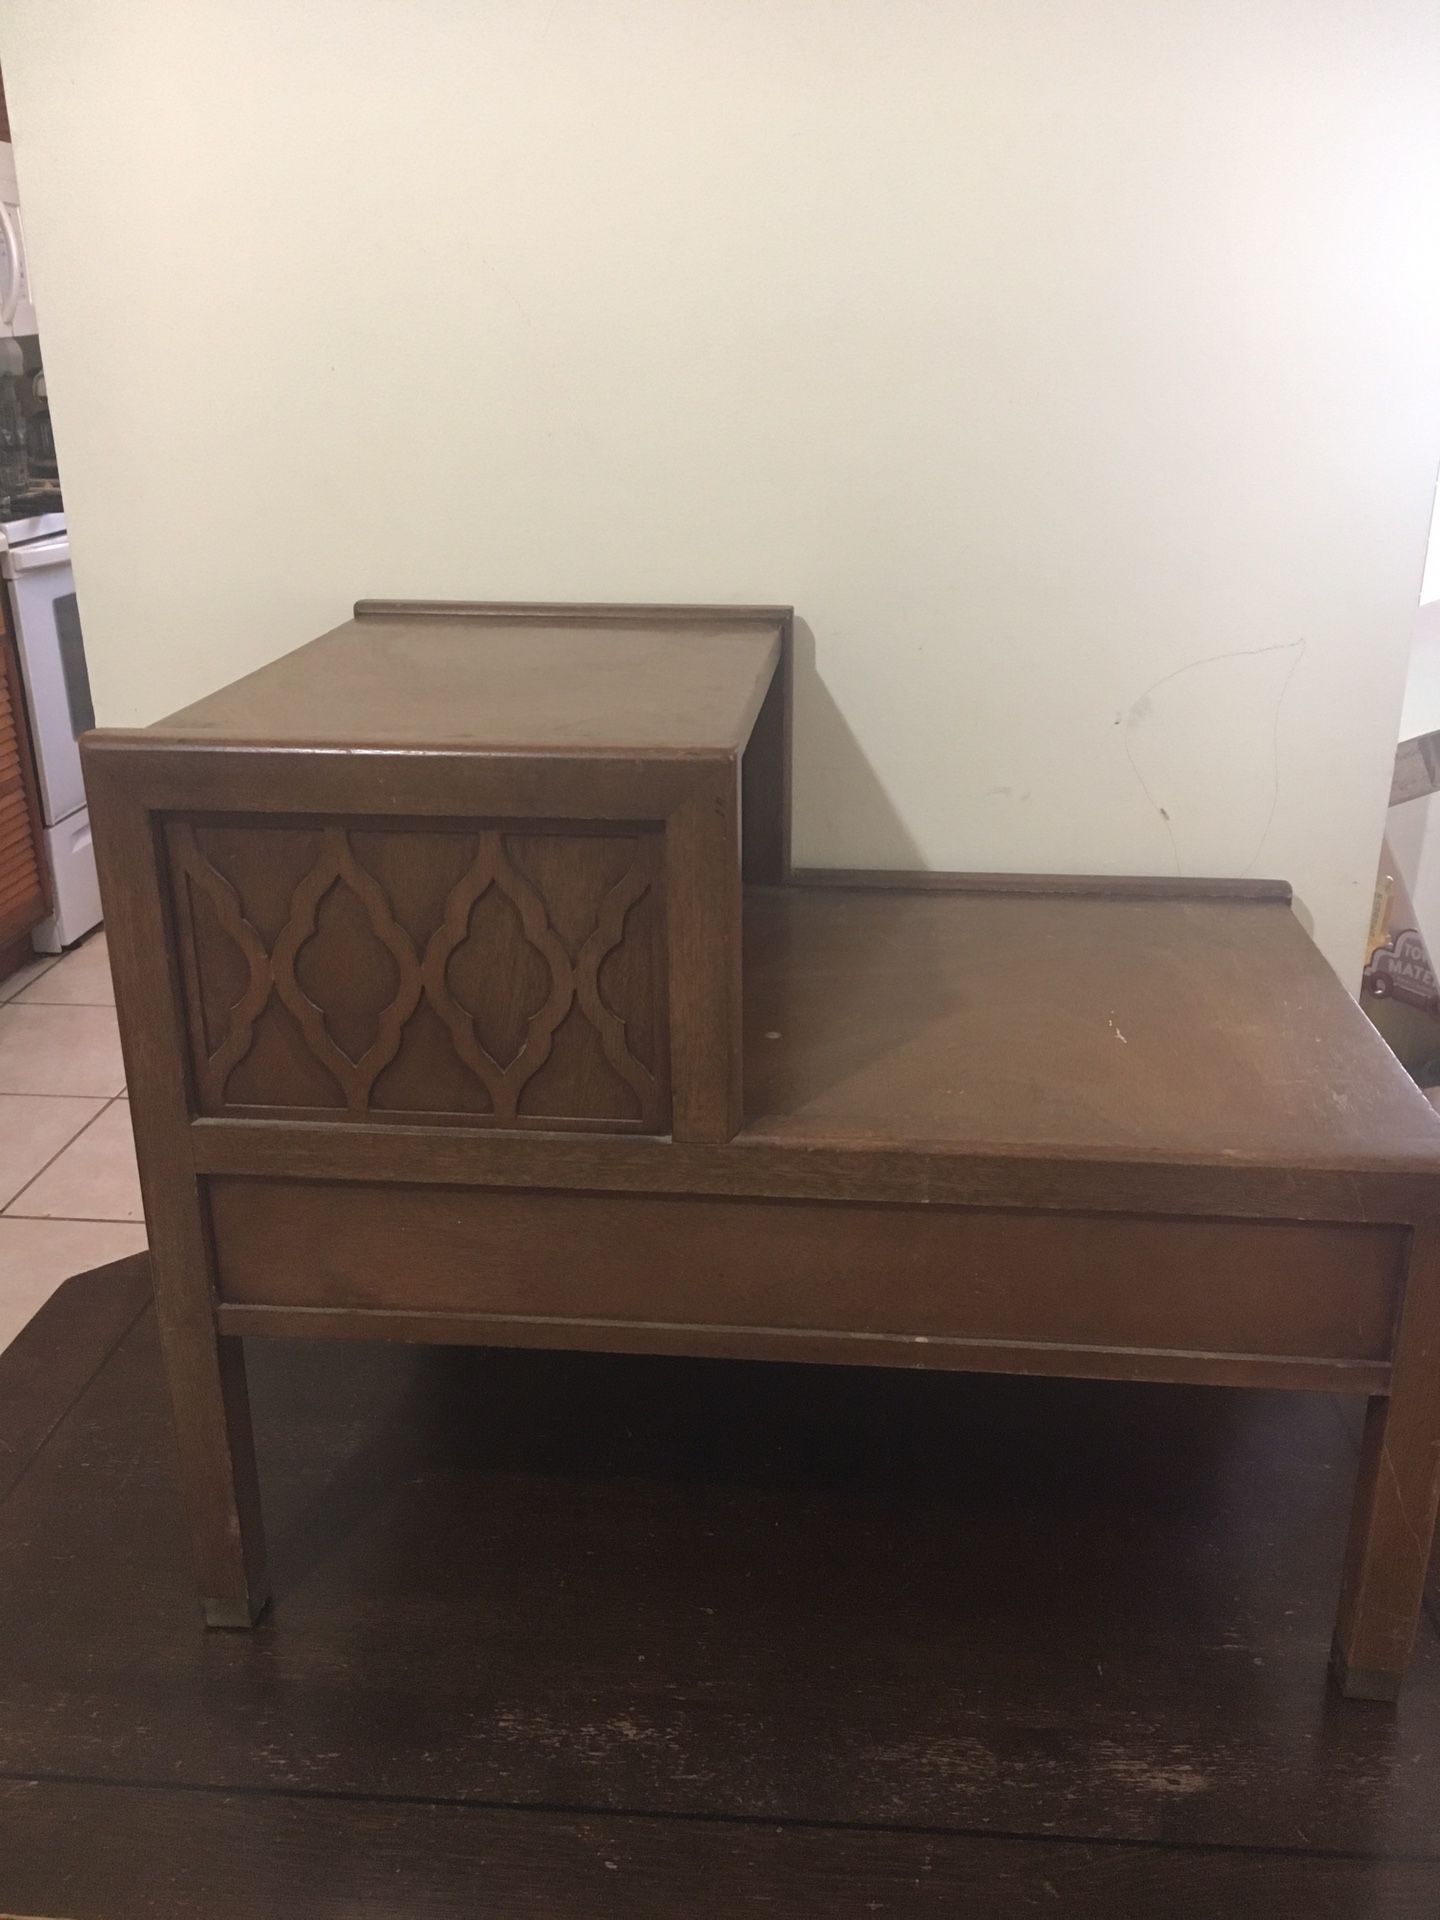 Table with drawer